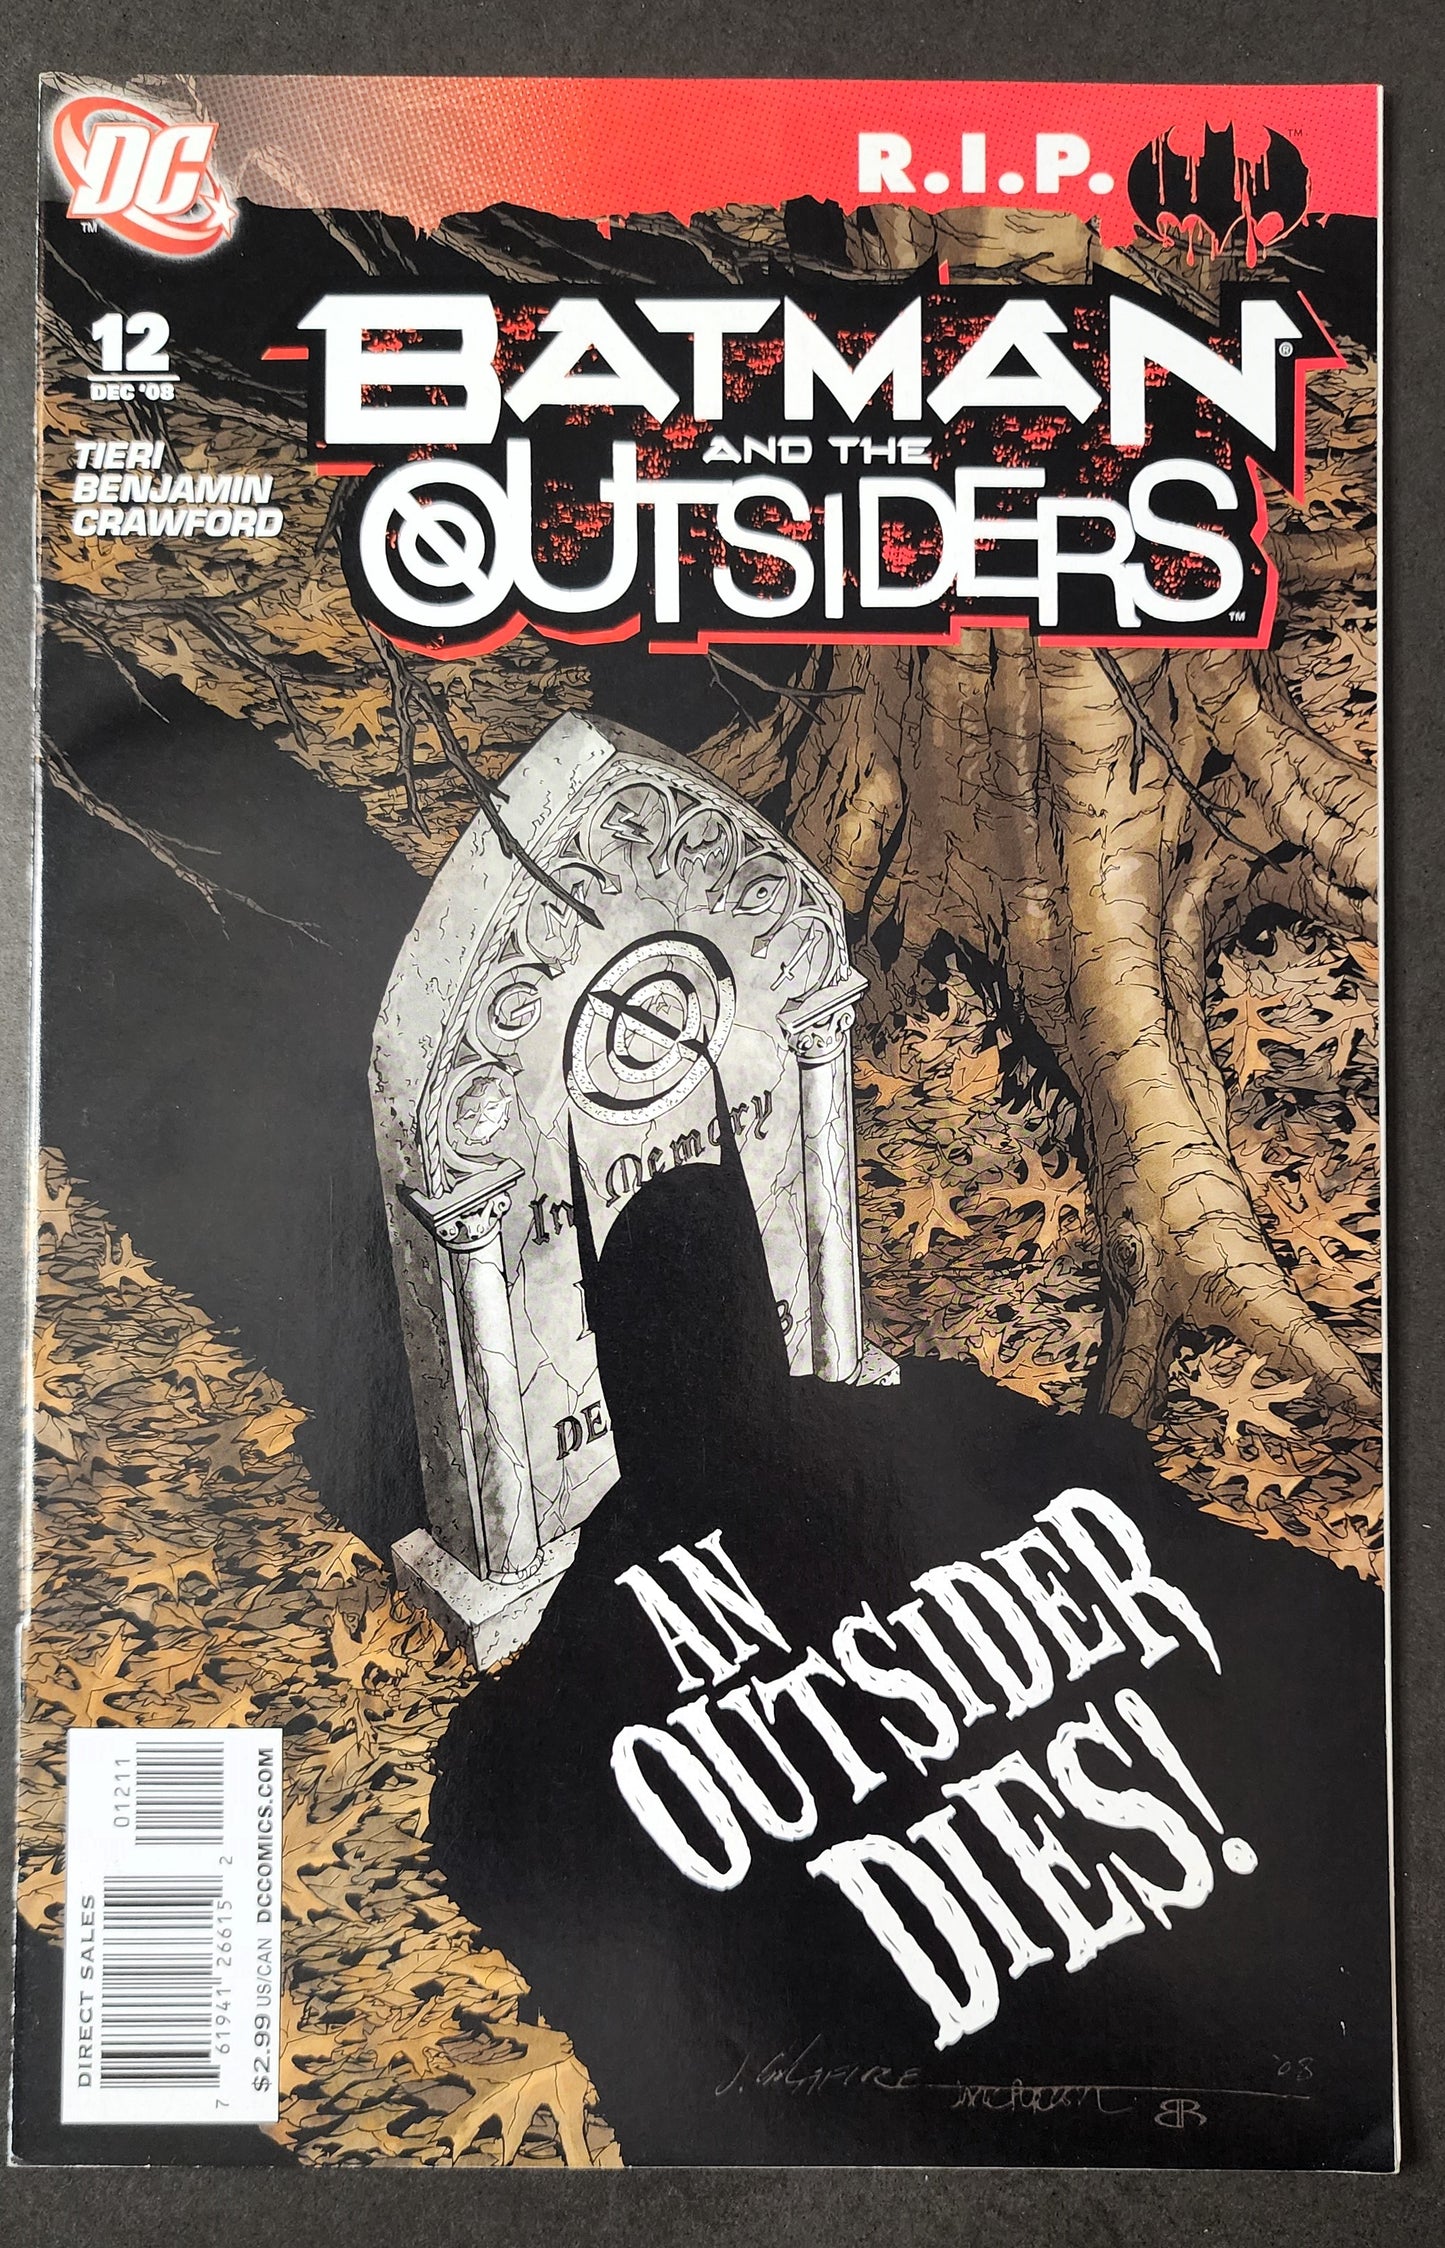 Batman and the Outsiders (Vol. 2) #12 (FN/VF)